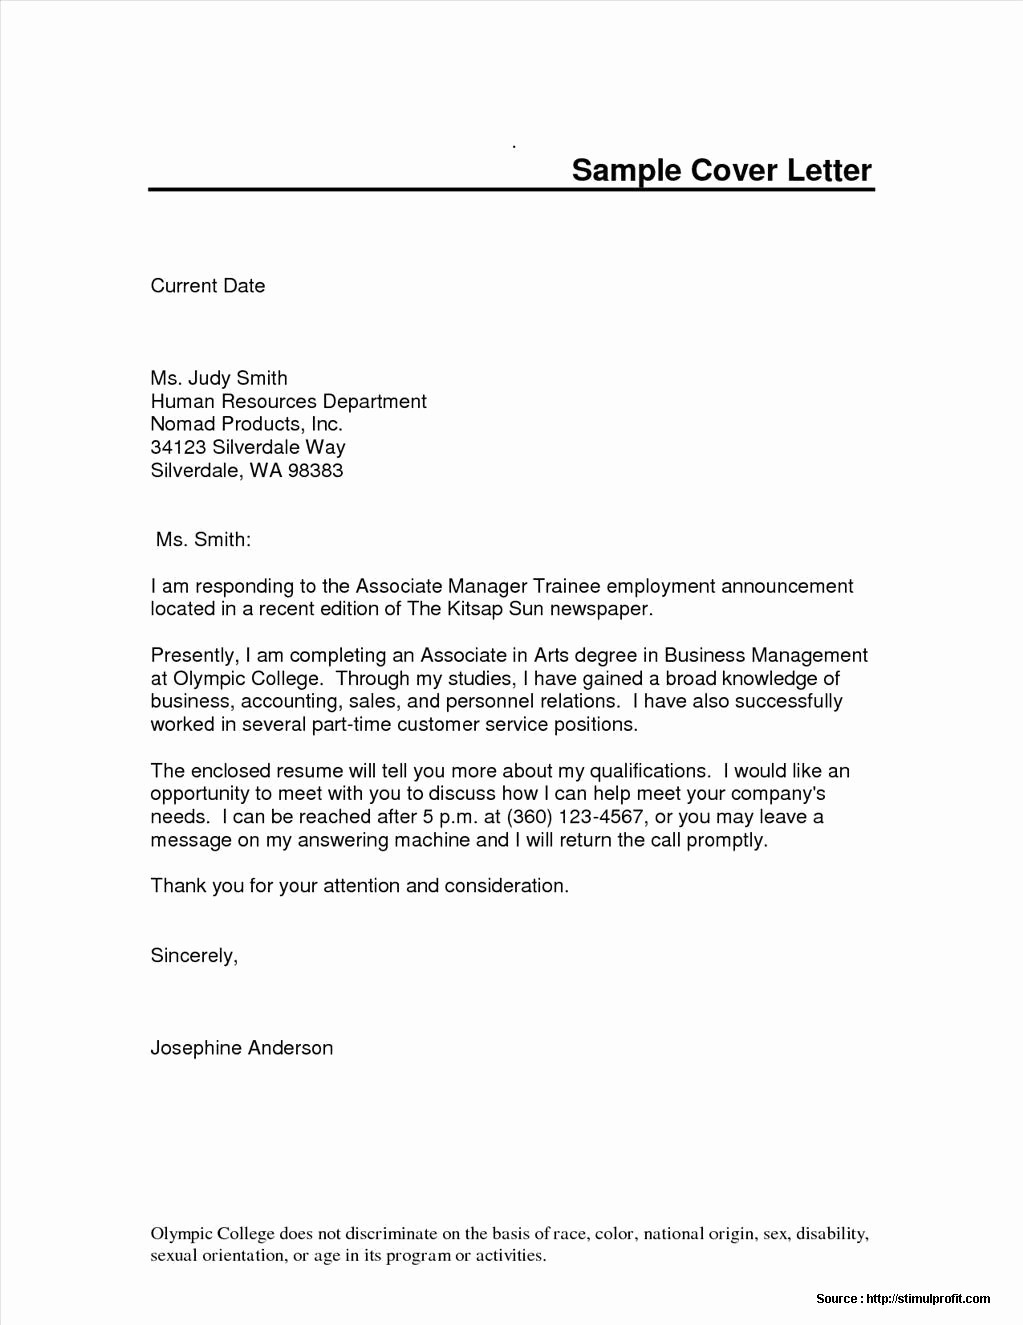 Template for Cover Letter Free Beautiful Free Cover Letter Template Word 2010 Cover Letter